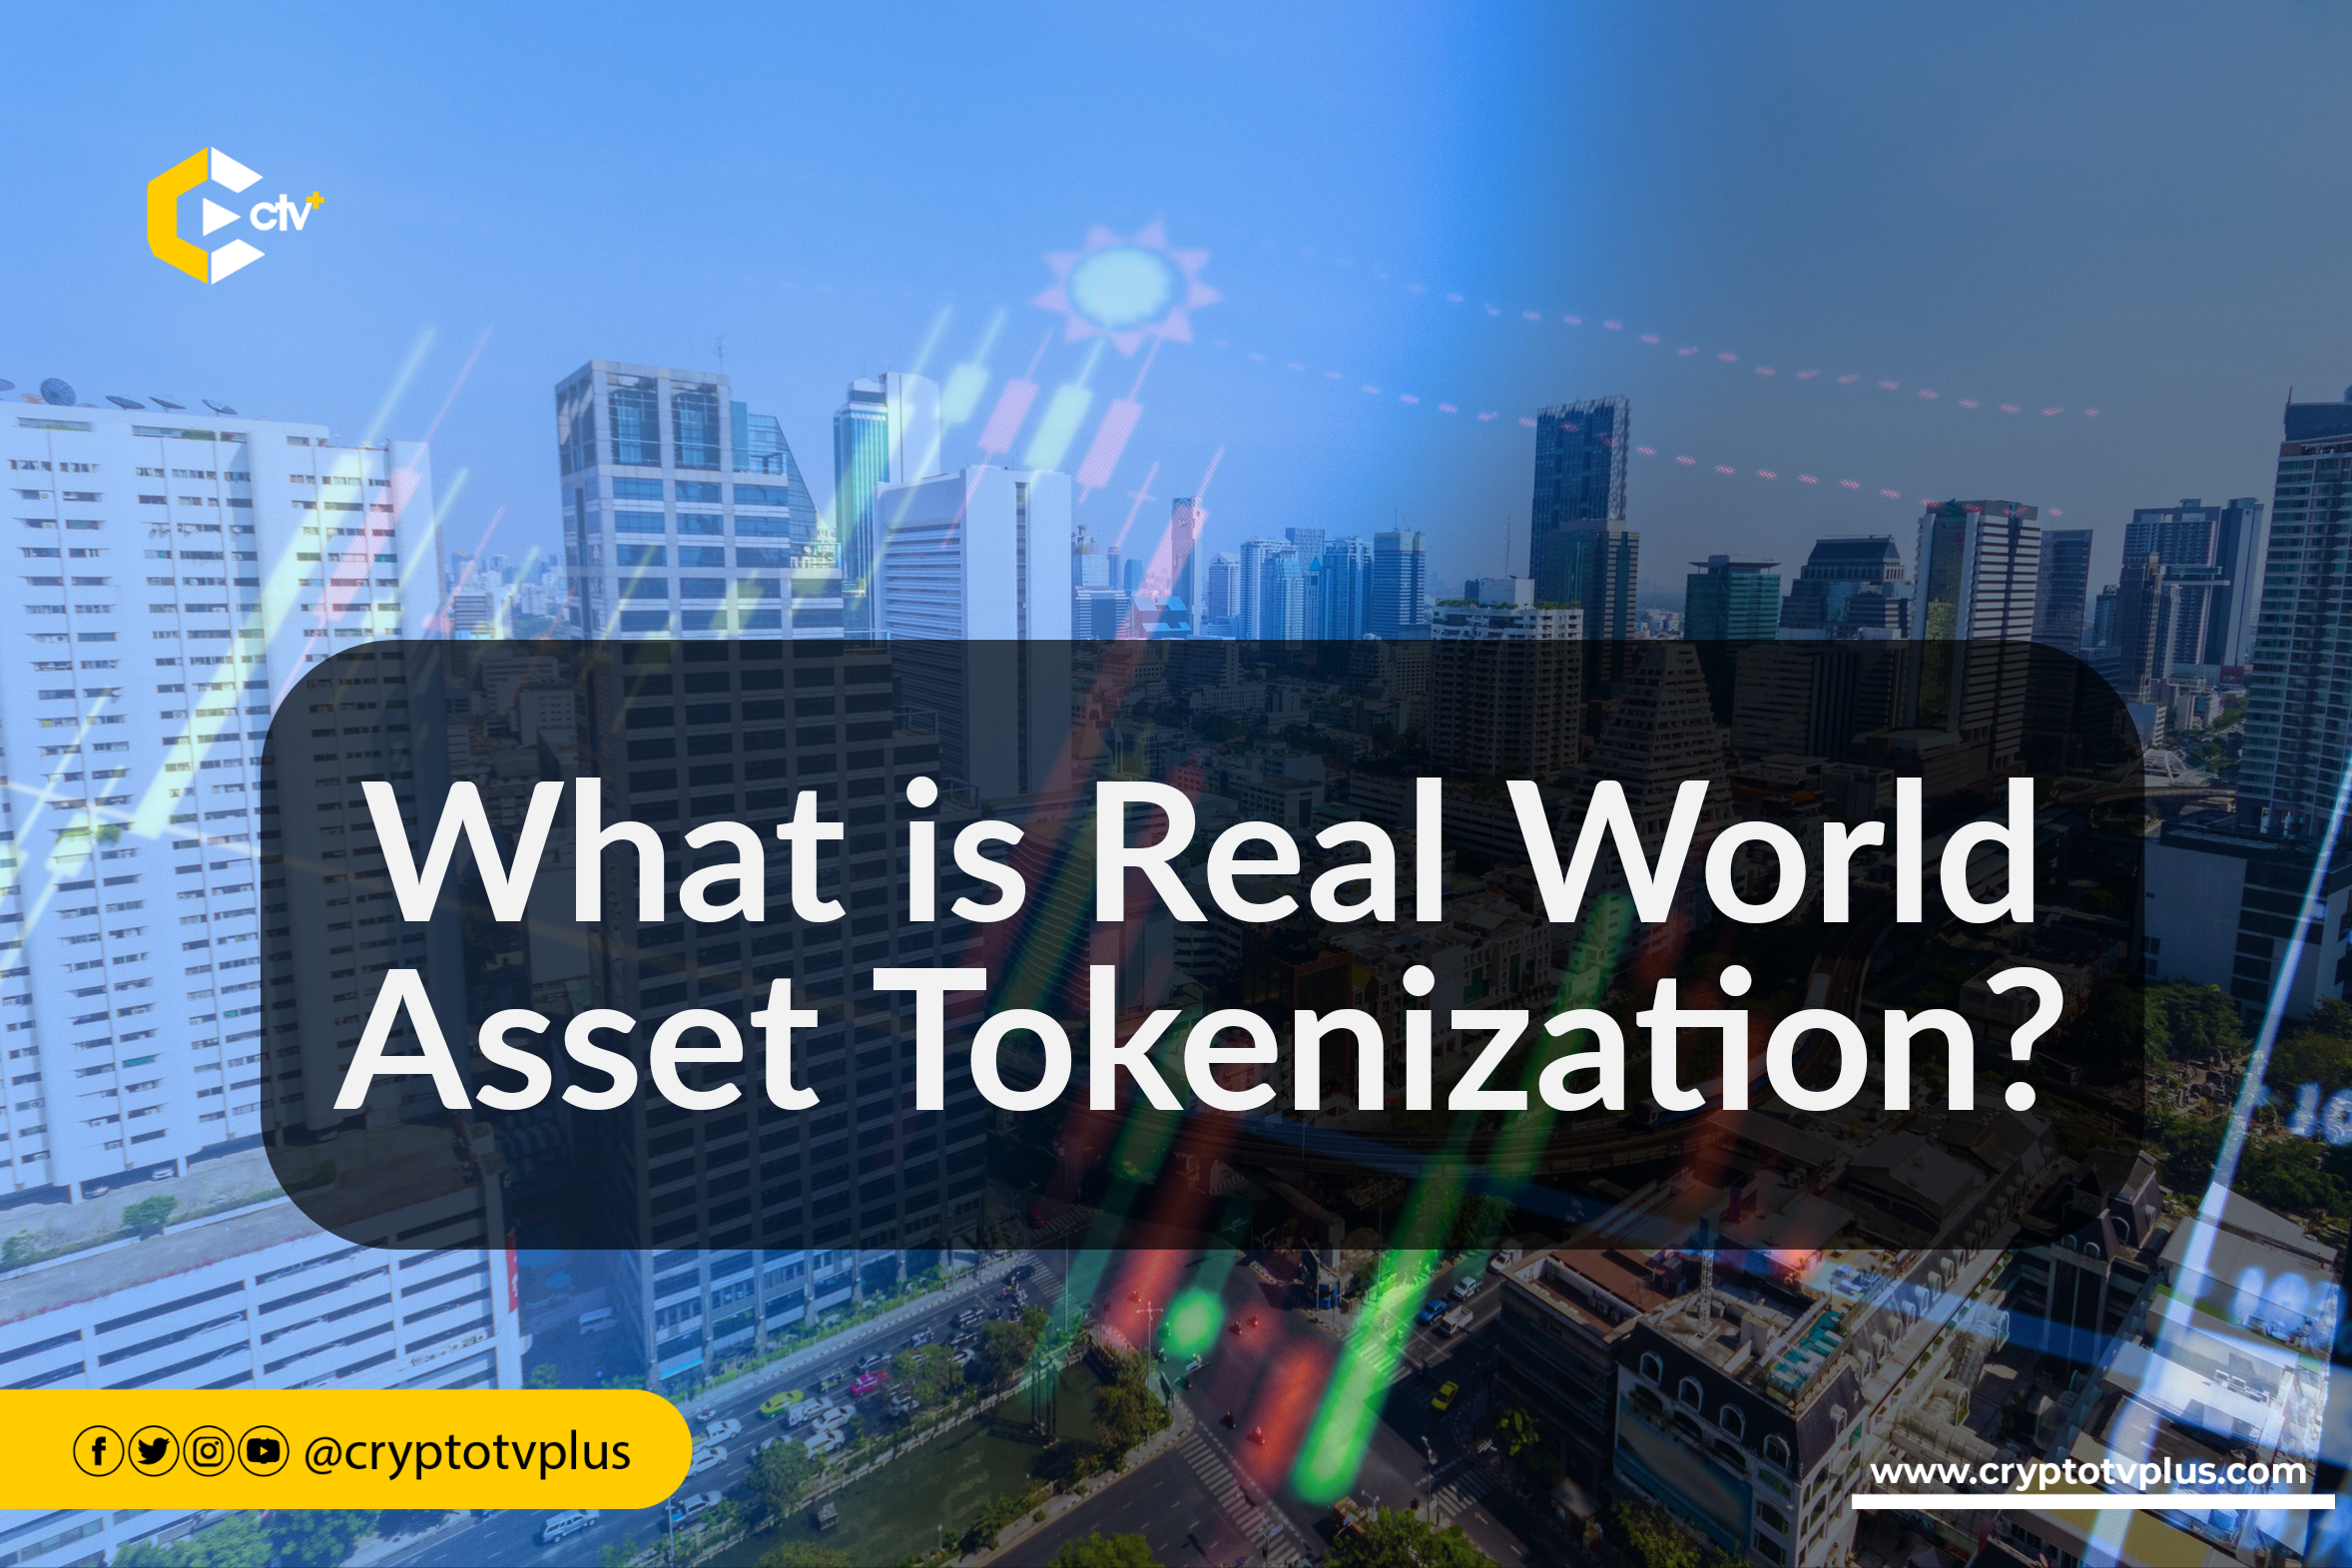 Discover the concept of Real World Asset Tokenization (RWA) & impact, exploring the narrative & significance behind this growing crypto sector